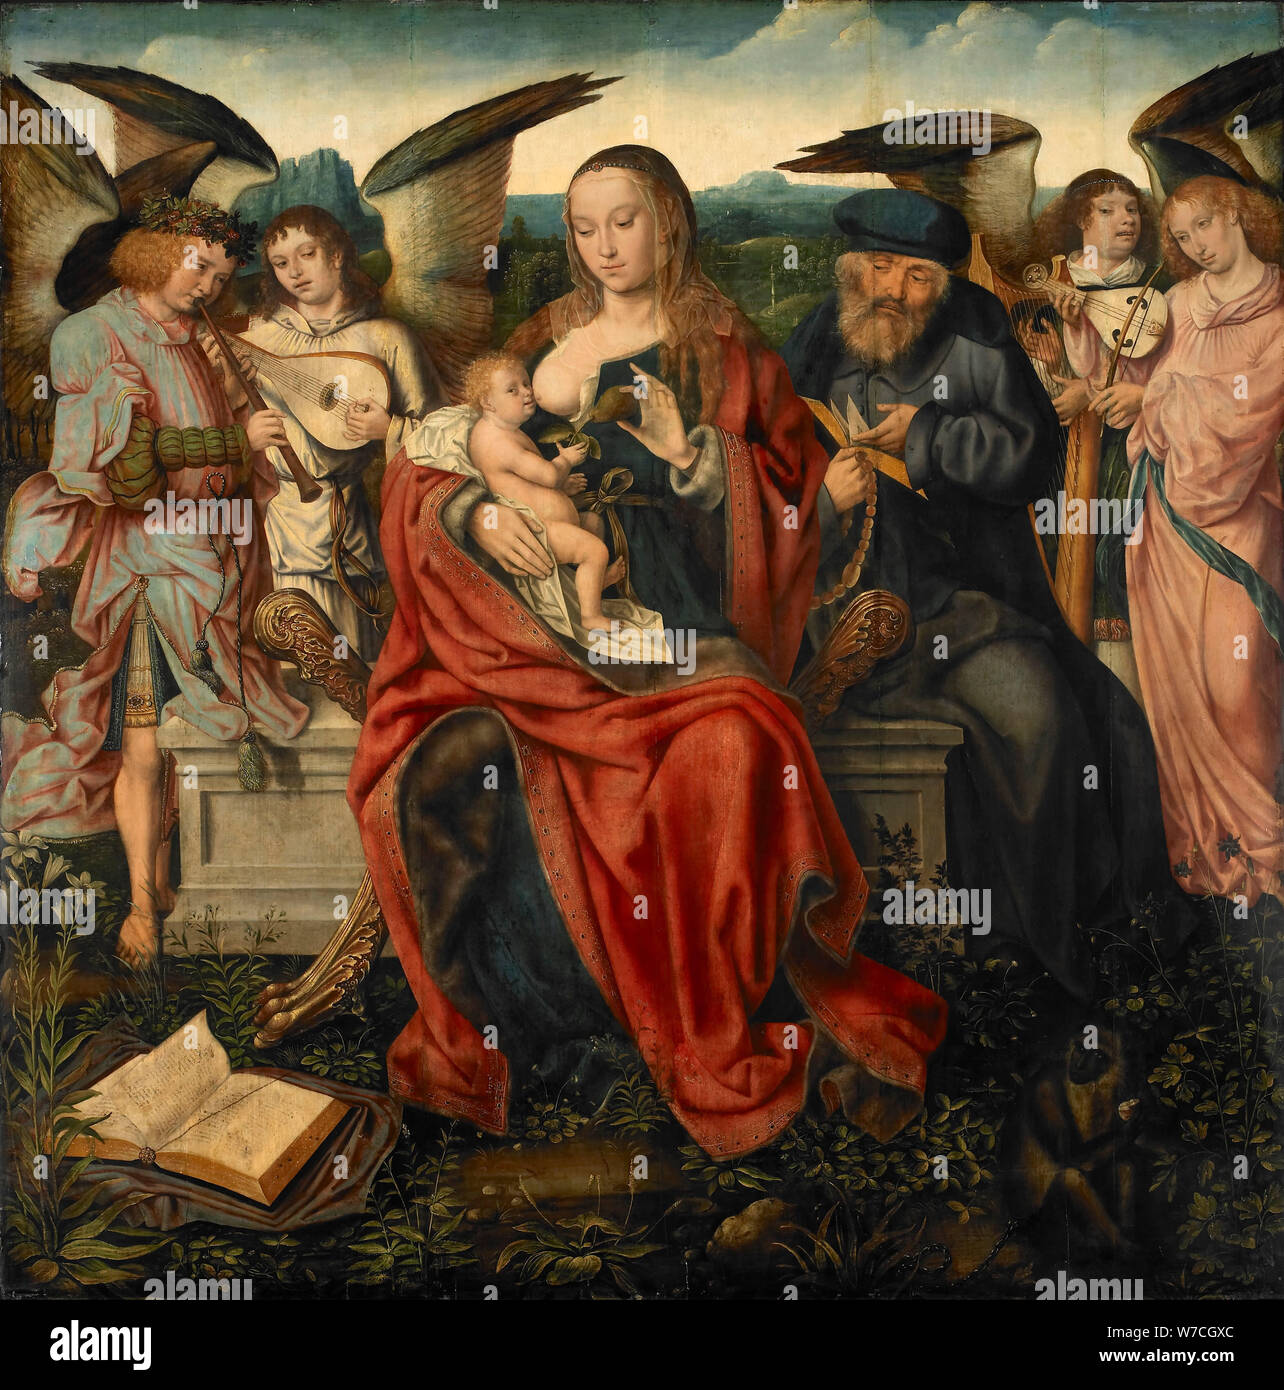 Holy Family with Music Making Angels, ca 1515. Stock Photo